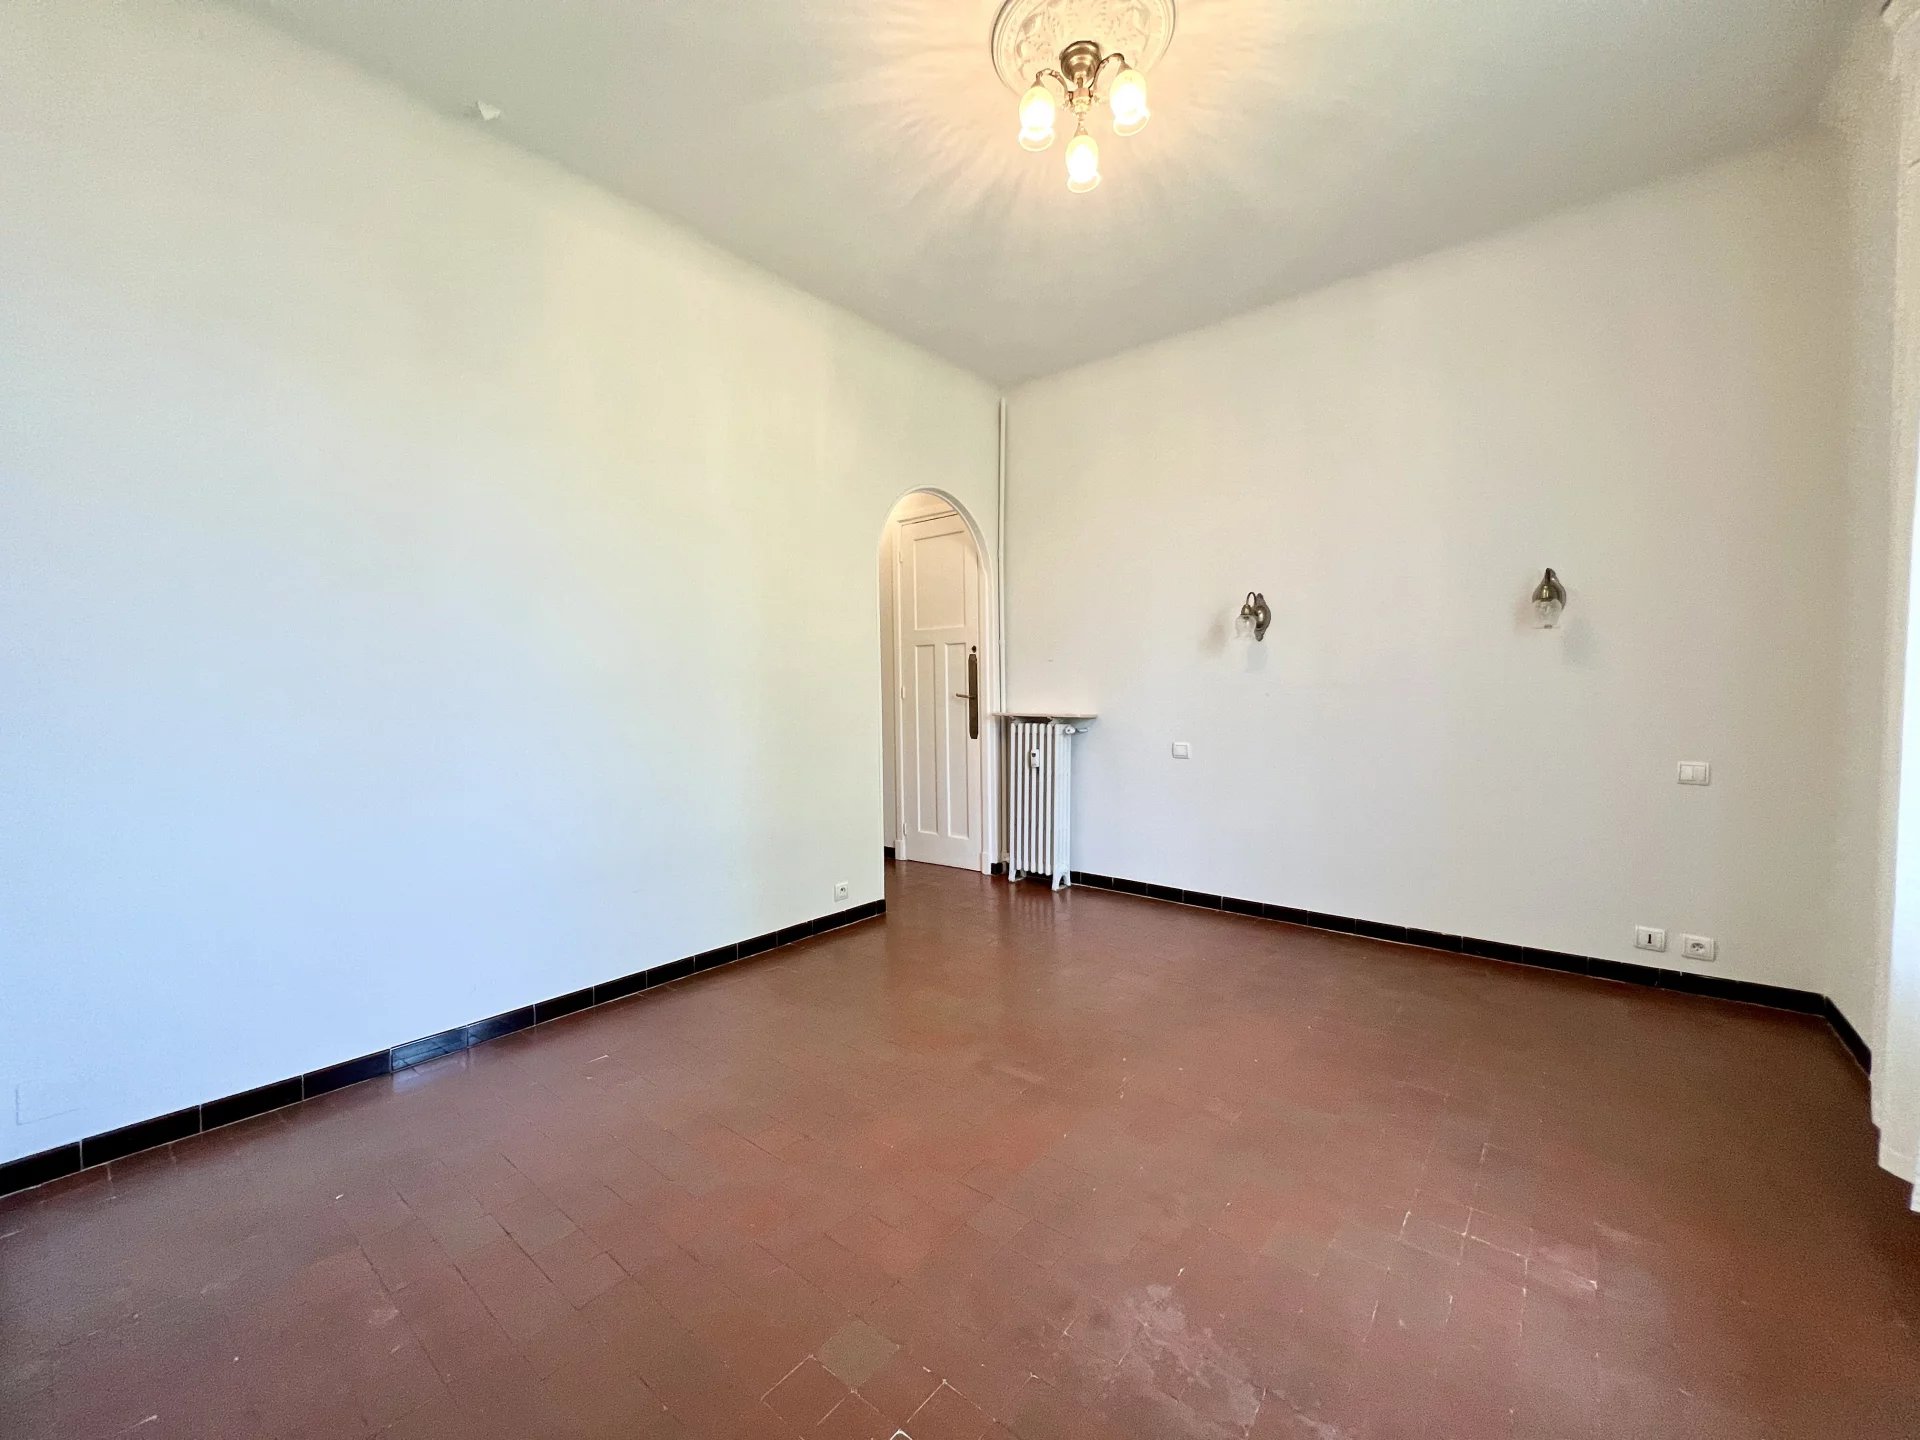 Bourgeois of 1or 2 bedrooms with high floor balconies, elevator and cellar